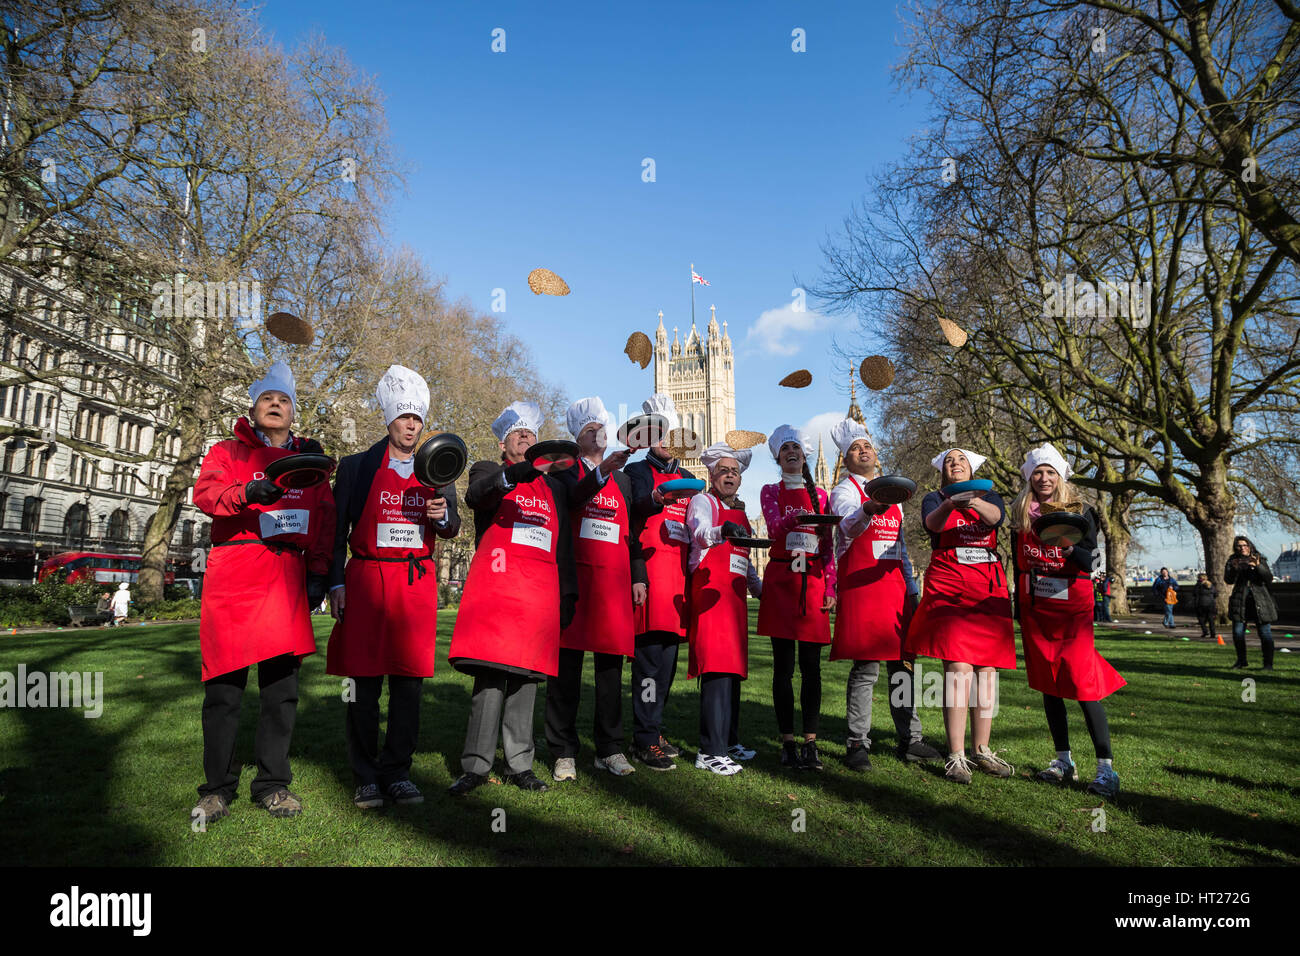 L-R Nigel Nelson, George Parker, Michael Crick, Robbie Gibb, James Landale, Alastair Stewart, Mia Wormesley, Fasial Islam, Caroline Wheeler and Jane Merrick. MPs, Lords and Media attend the 20th Annual Rehab Parliamentary Pancake Race at Victoria Gardens in Westminster, London, UK. Stock Photo